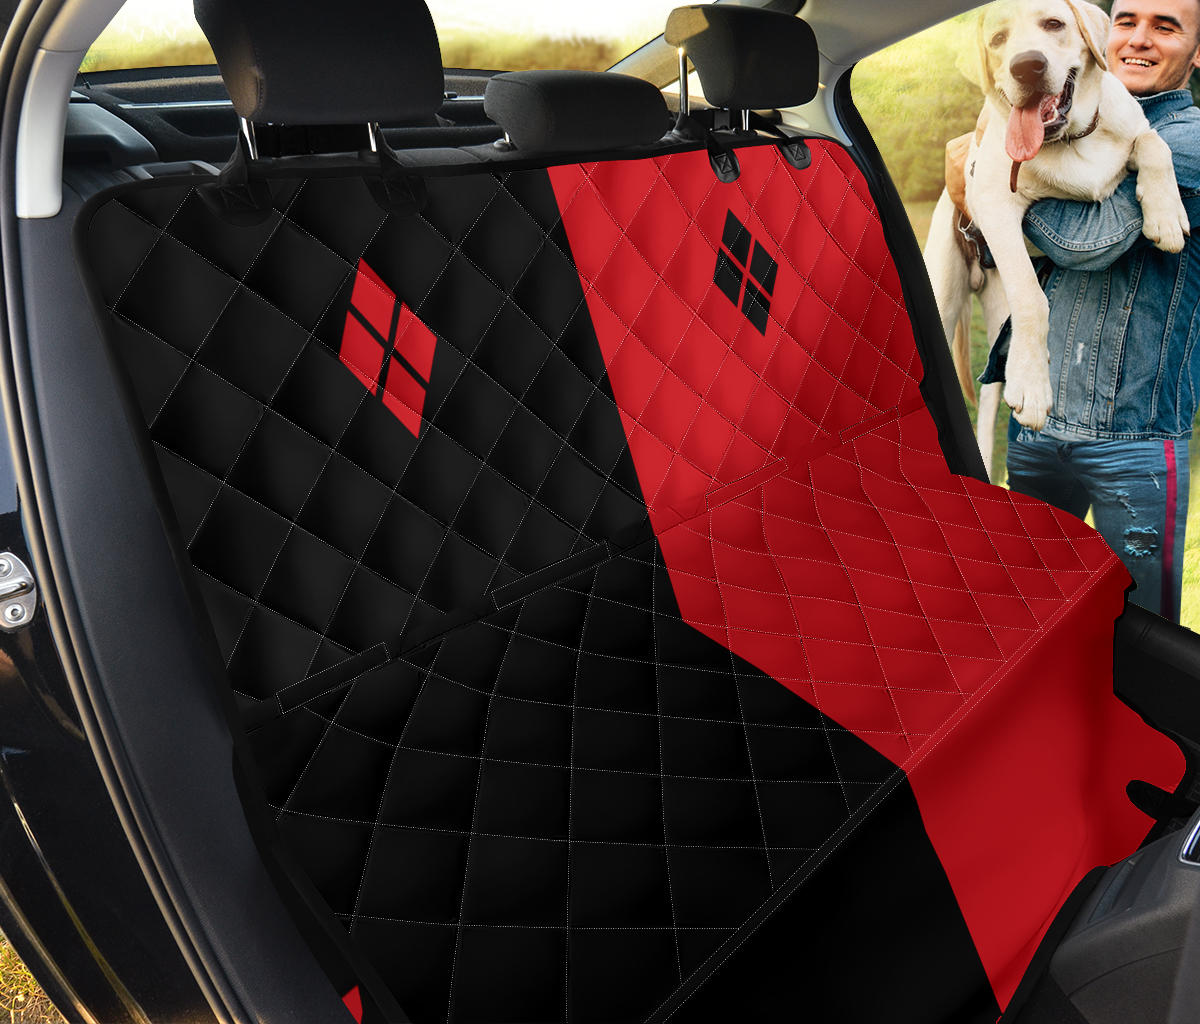 Harley Car Back Seat Cover for Pets  Ms. Quinn Inspired